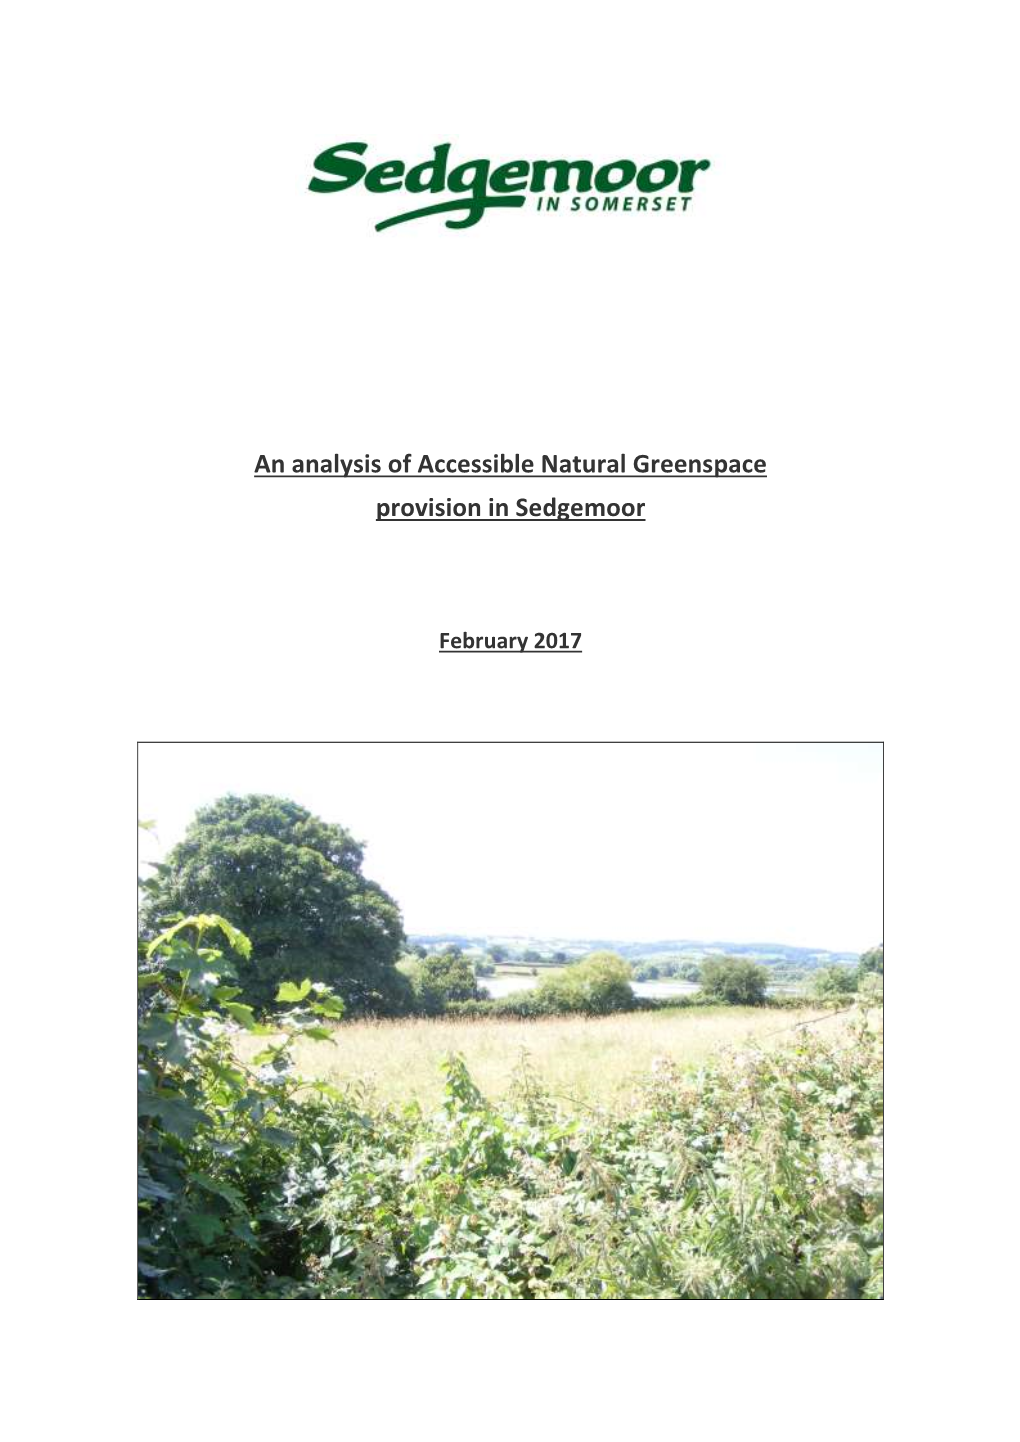 Accessible Natural Greenspace Assessment